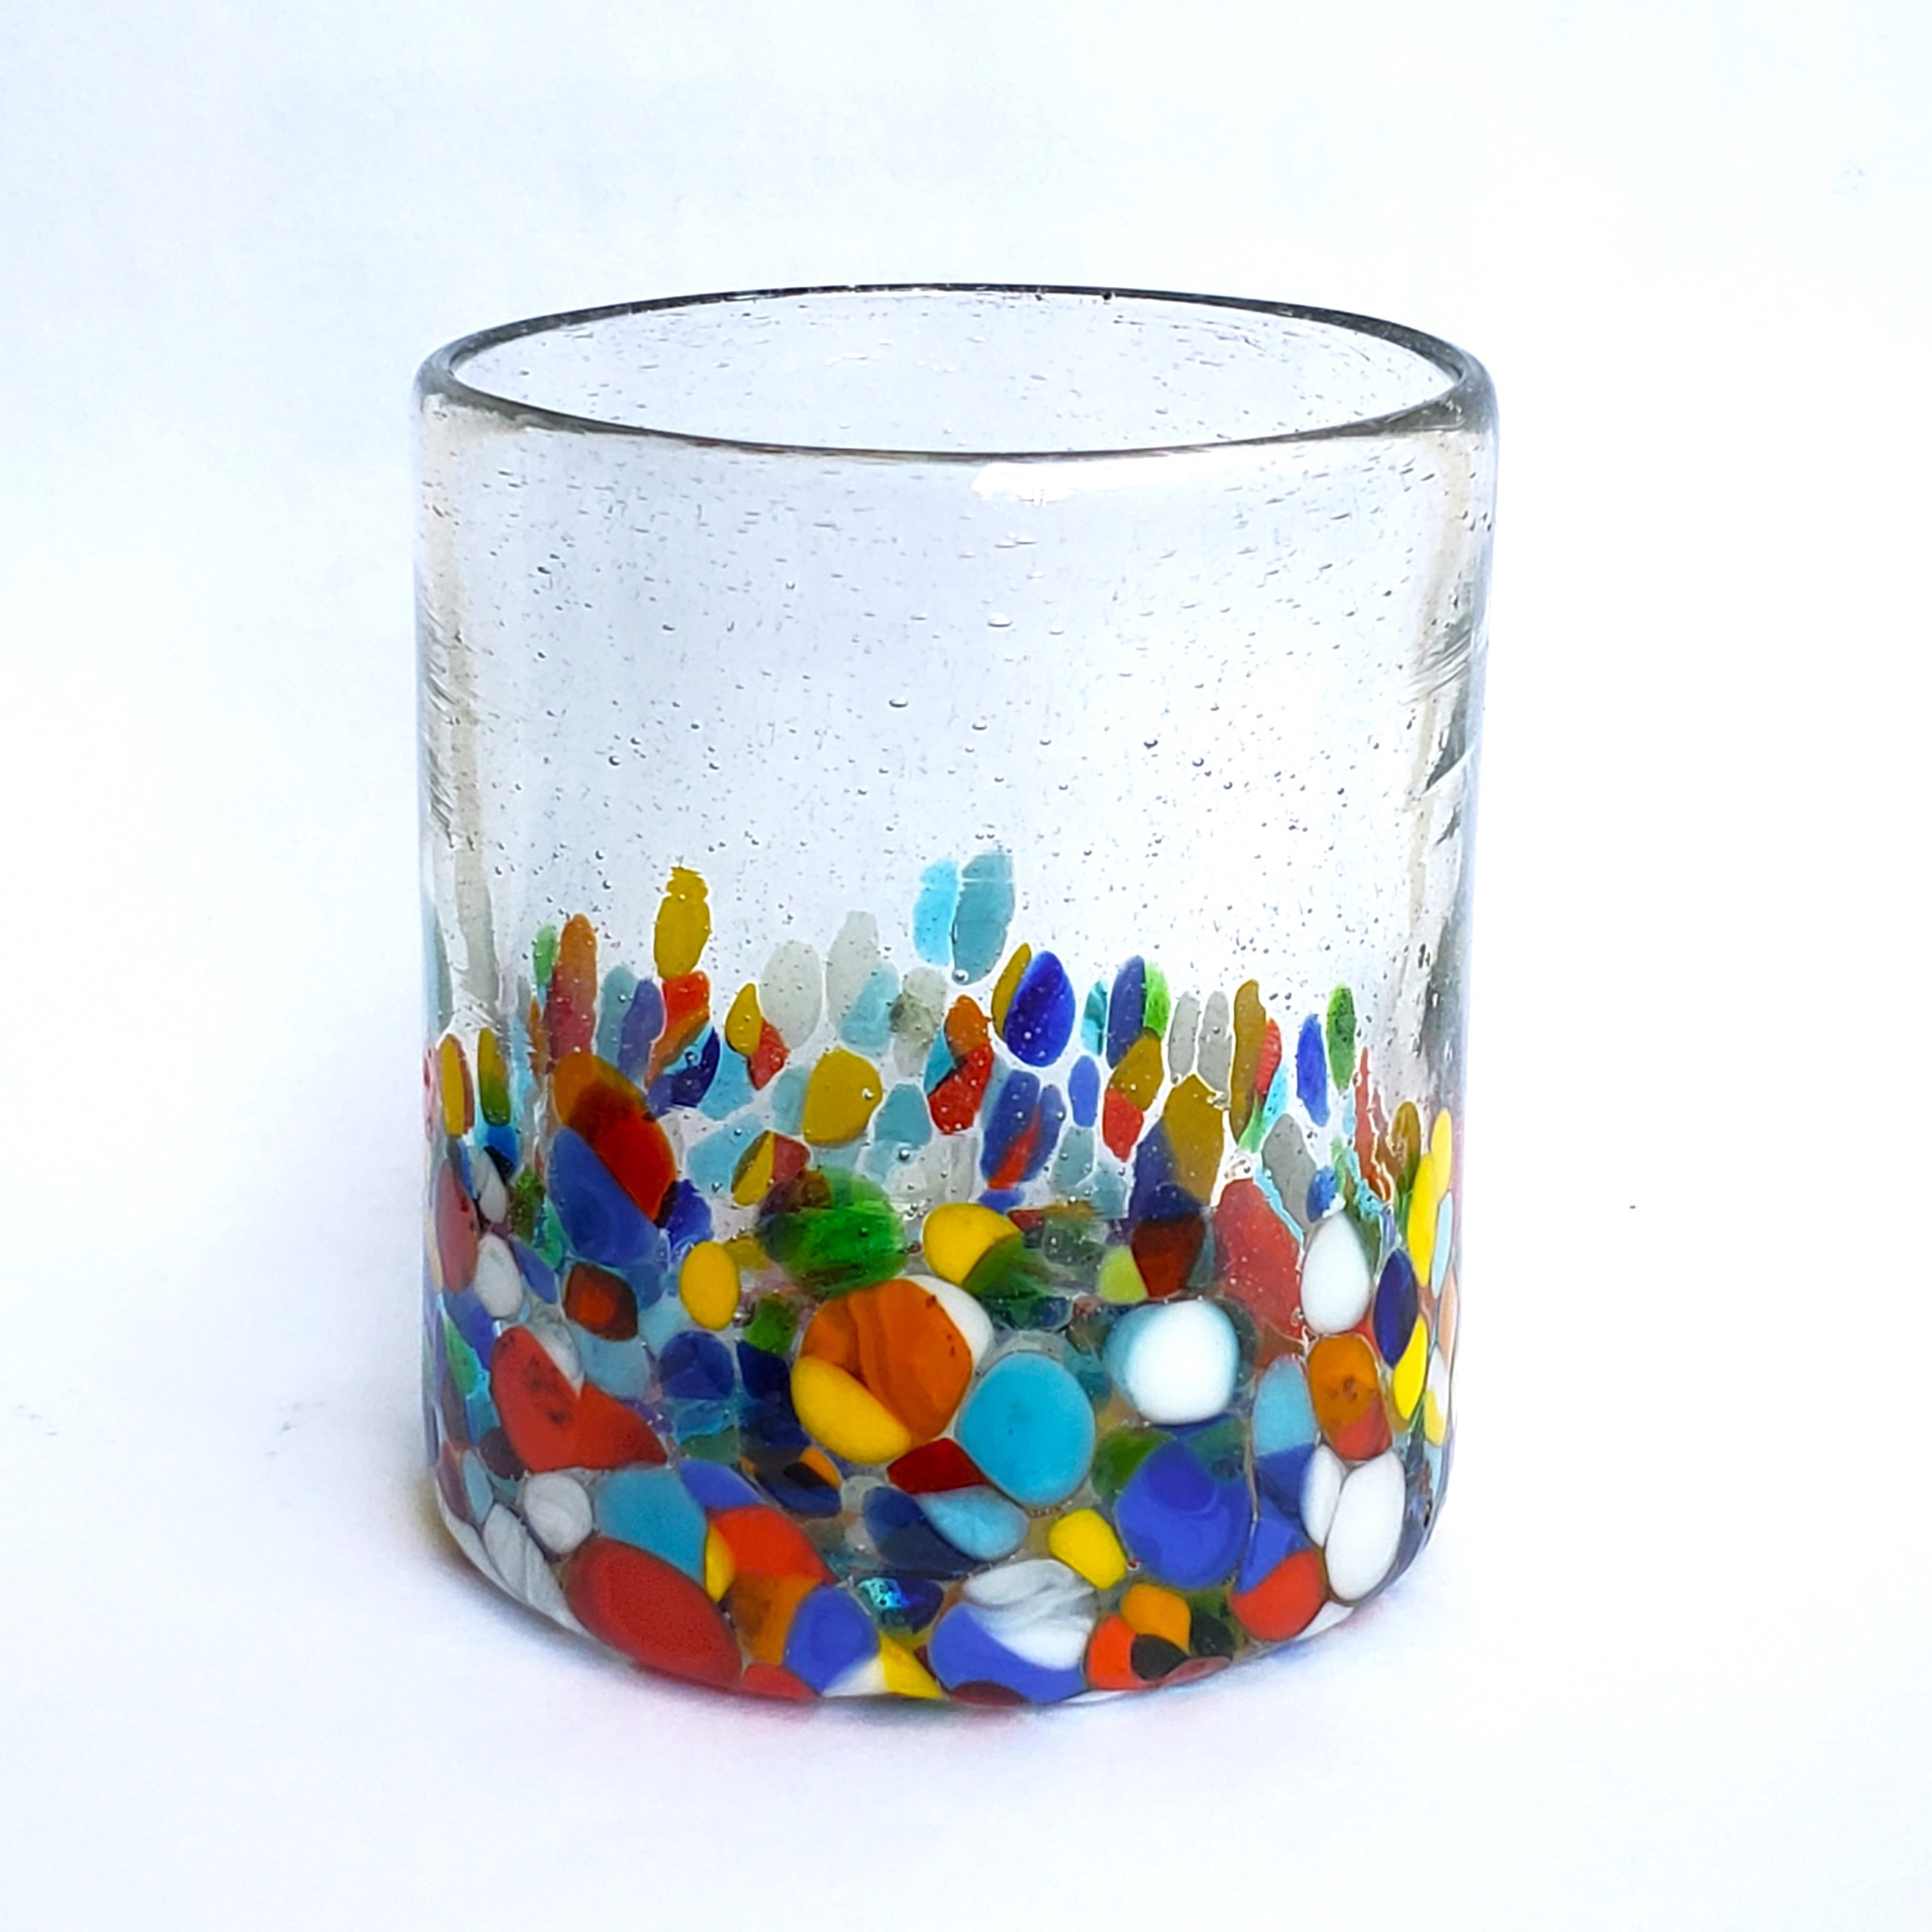 Novedades / fetti 9 oz Short Tumblers (set of 6) / Our Clear & Confetti Glassware combines the best of two worlds: clear, thick, sturdy handcrafted glass on top, meets the colorful, festive, confetti bottom! These glasses will sure be a standout in any table setting or as a fabulous gift for your loved ones. Crafted one by one by skilled artisans in Tonala, Mexico, each glass is different from the next making them unique works of art. You'll be amazed at how they make having a simple glass of water a happier experience. Made from eco-friendly recycled glass.